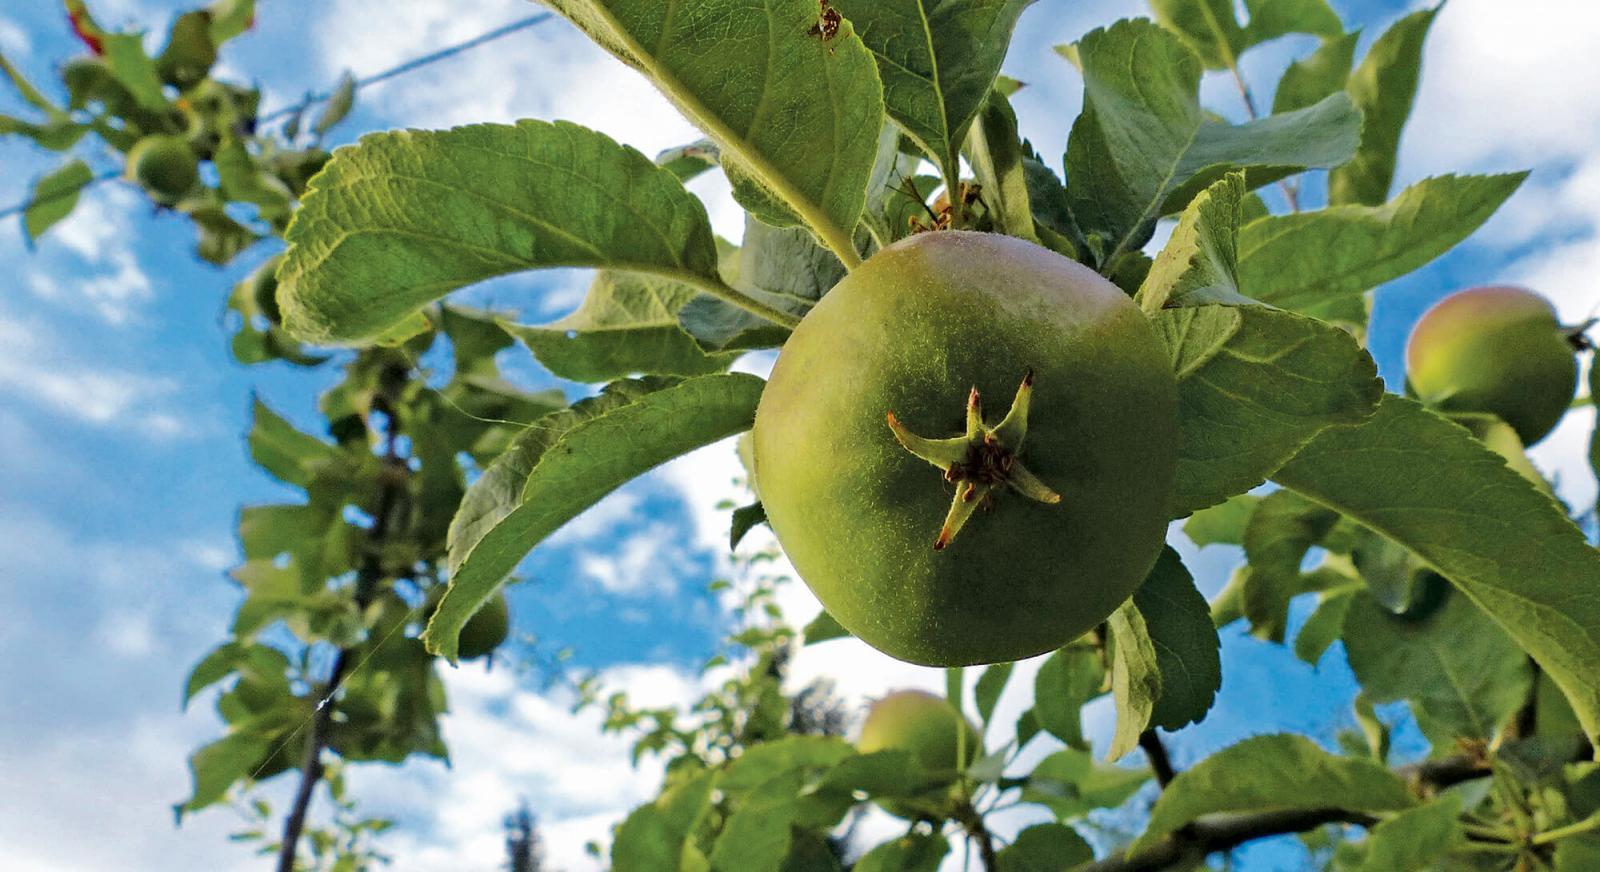 The easier way to integrate fruit trees into landscapes